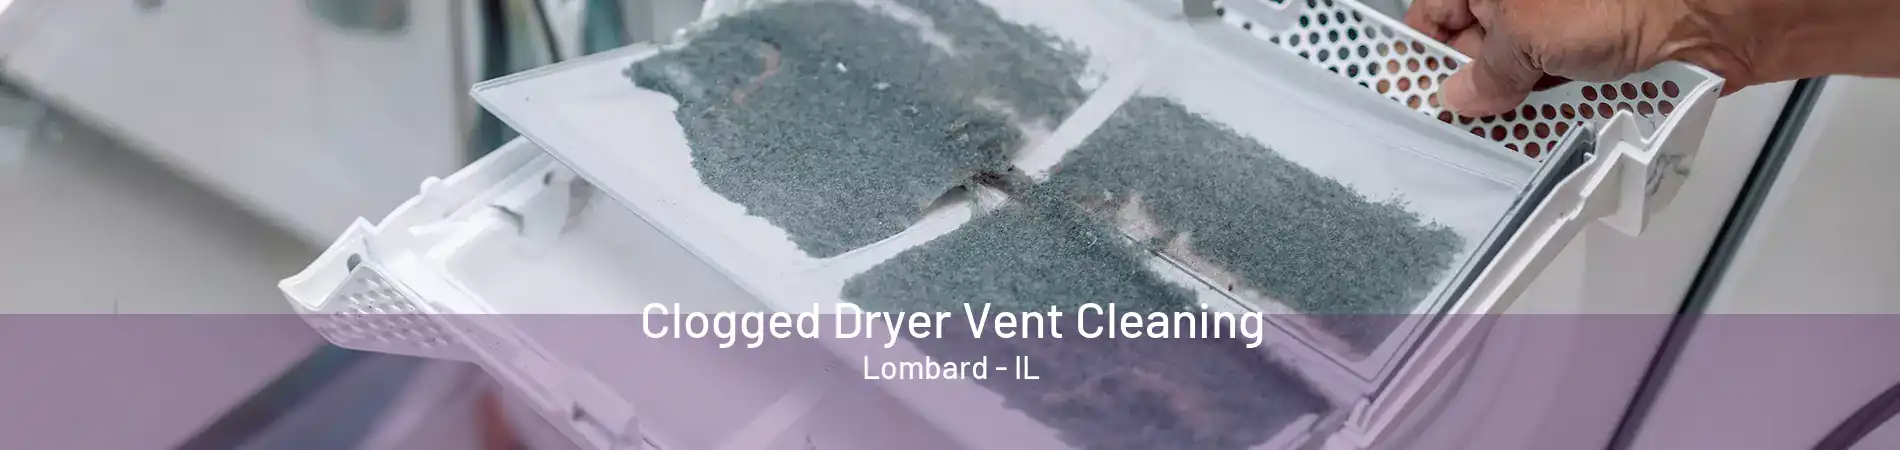 Clogged Dryer Vent Cleaning Lombard - IL